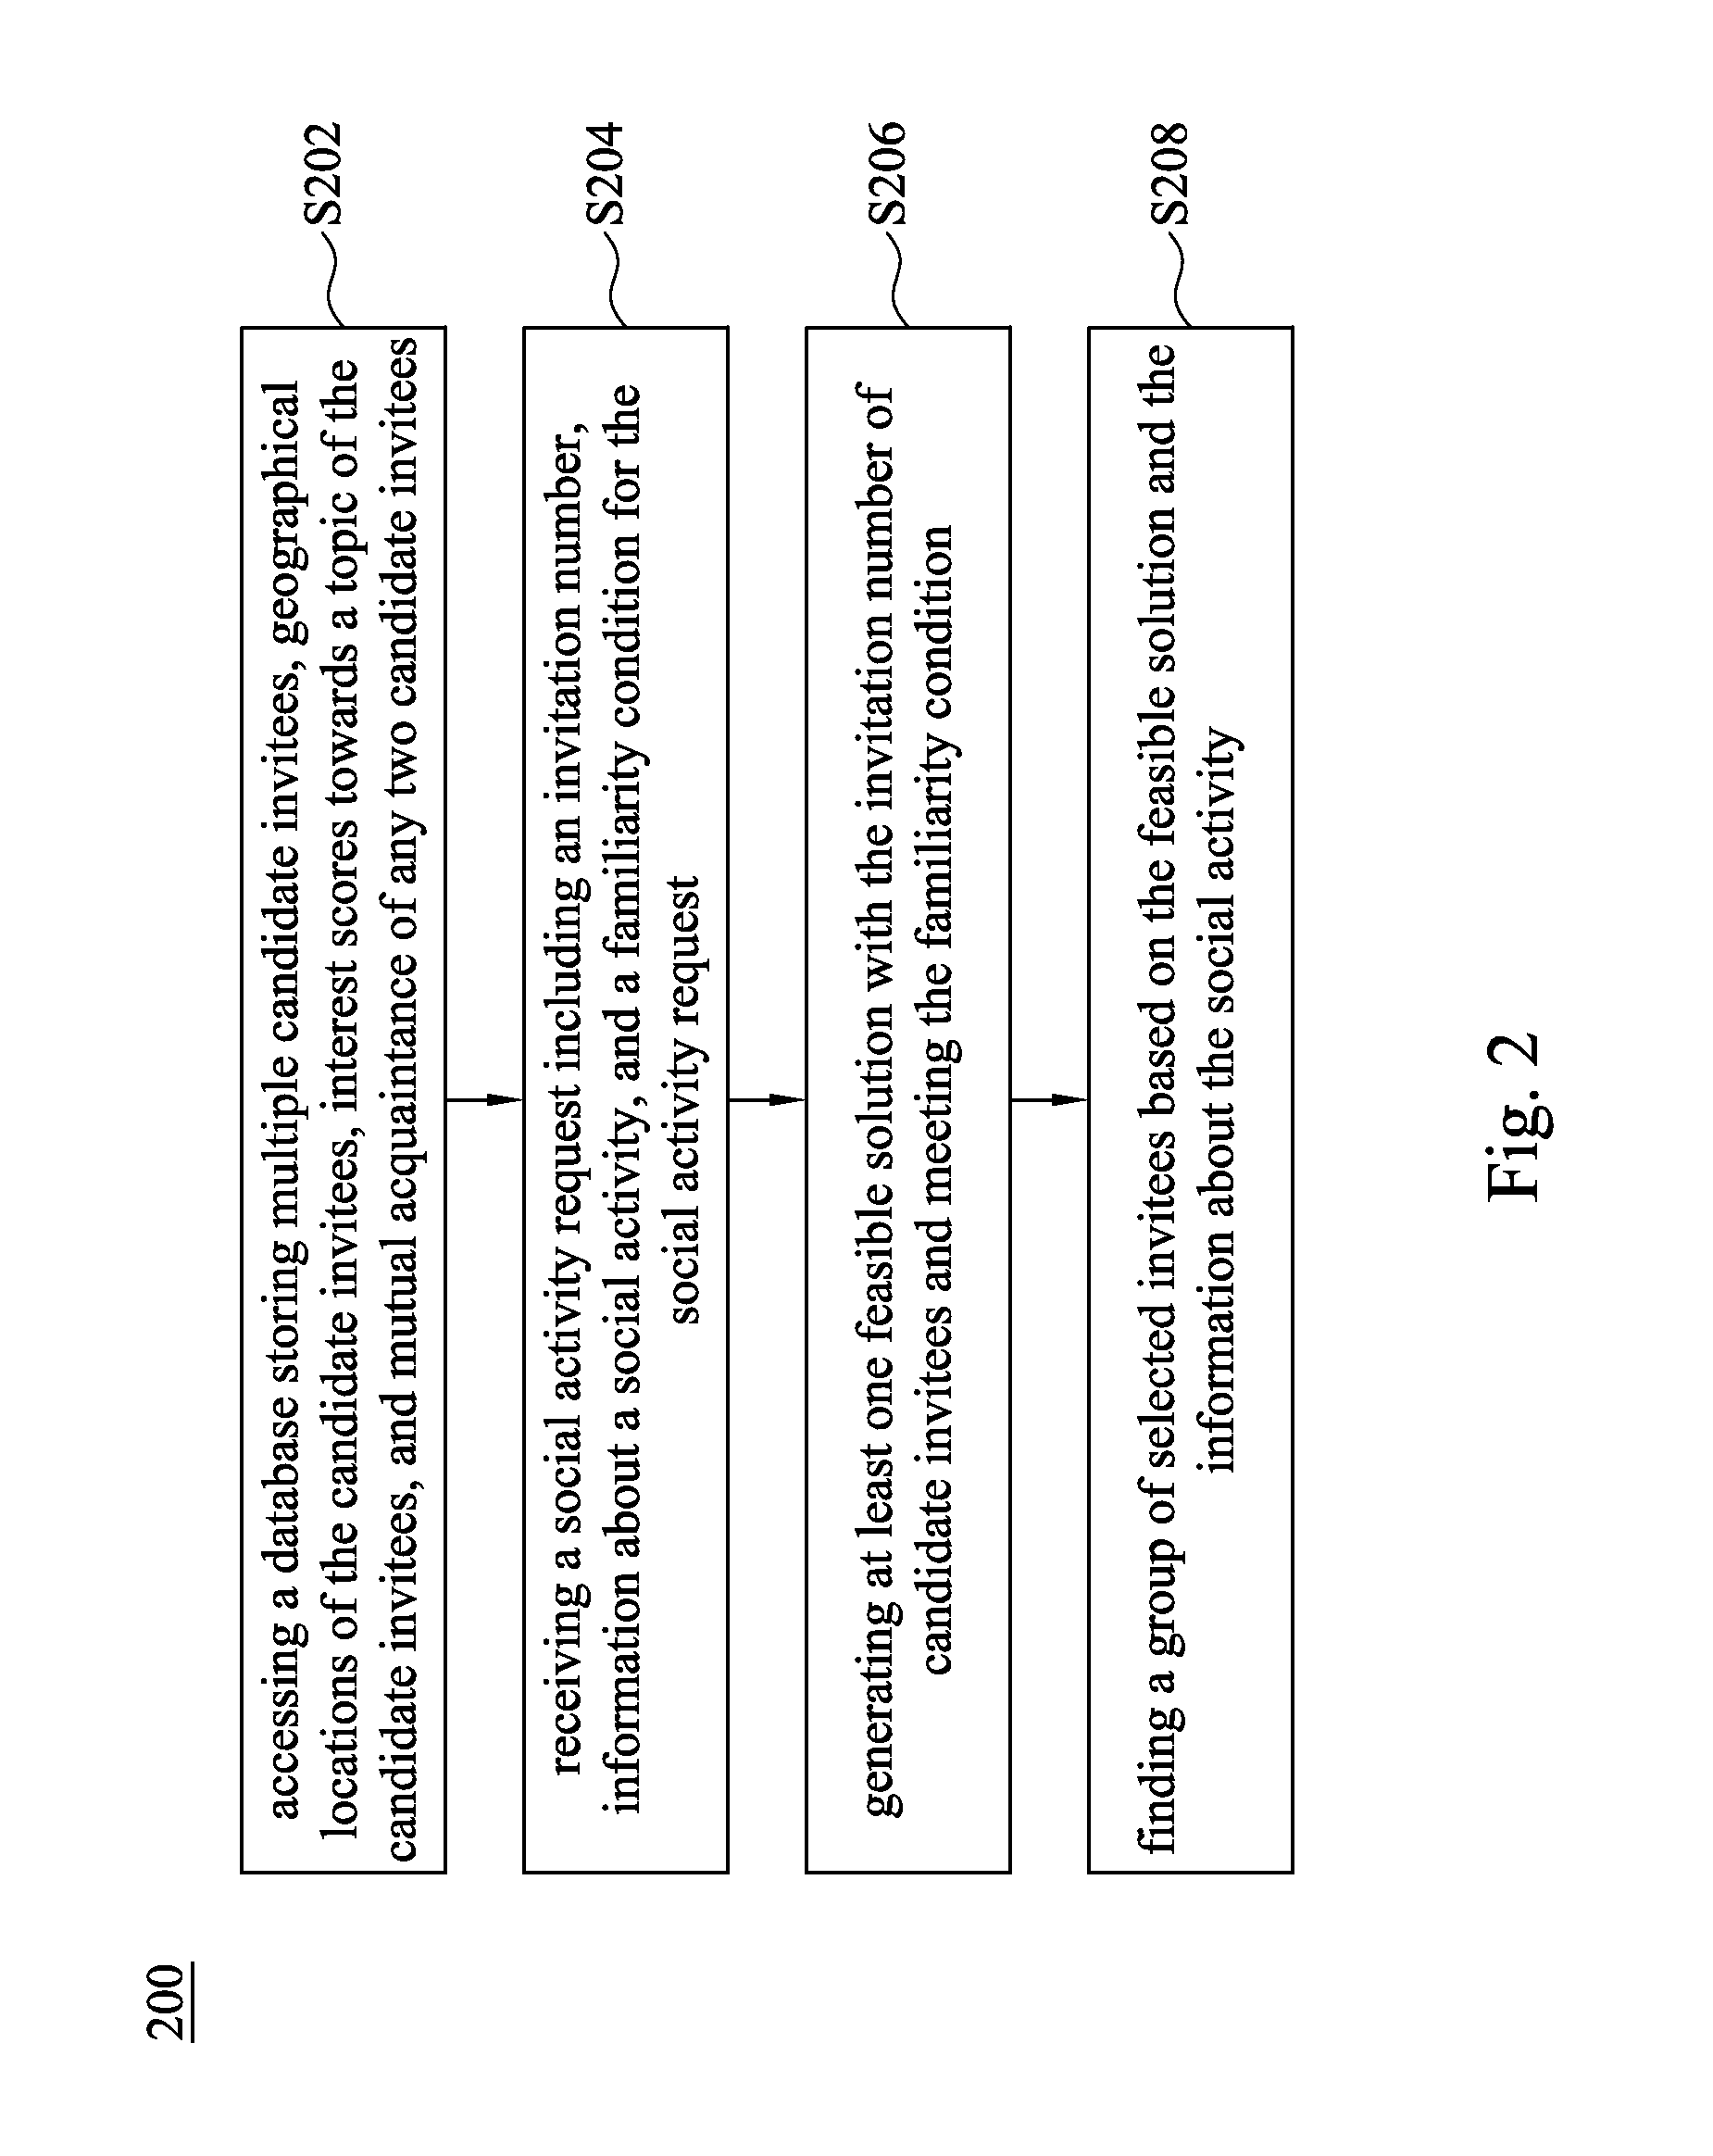 Social activity planning system and method